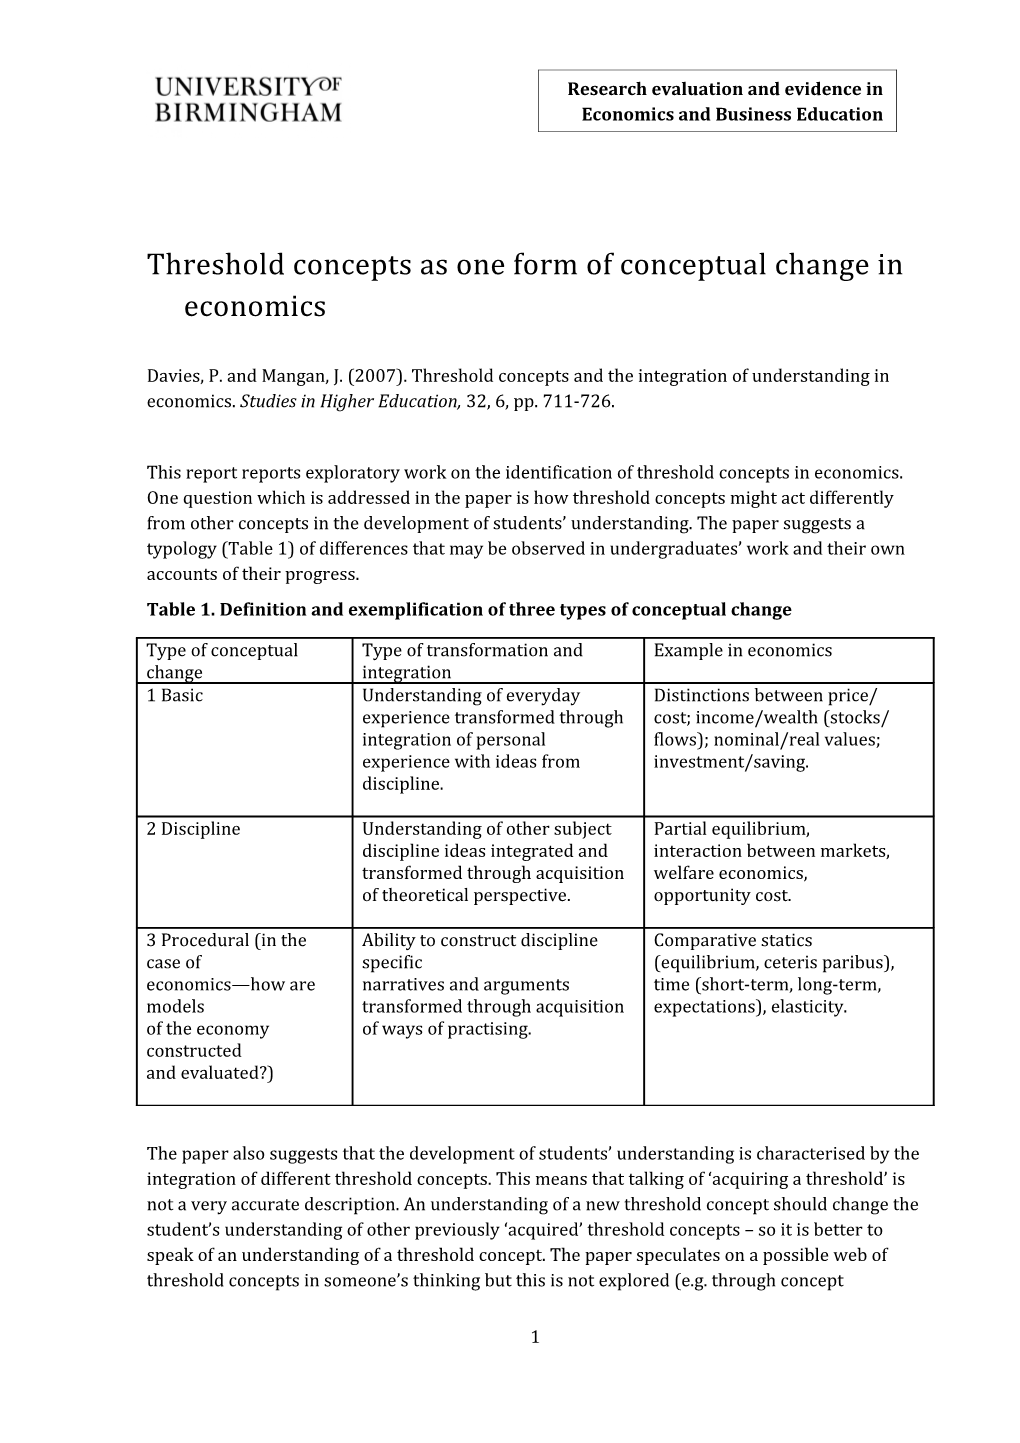 Threshold Concepts As One Form of Conceptual Change in Economics